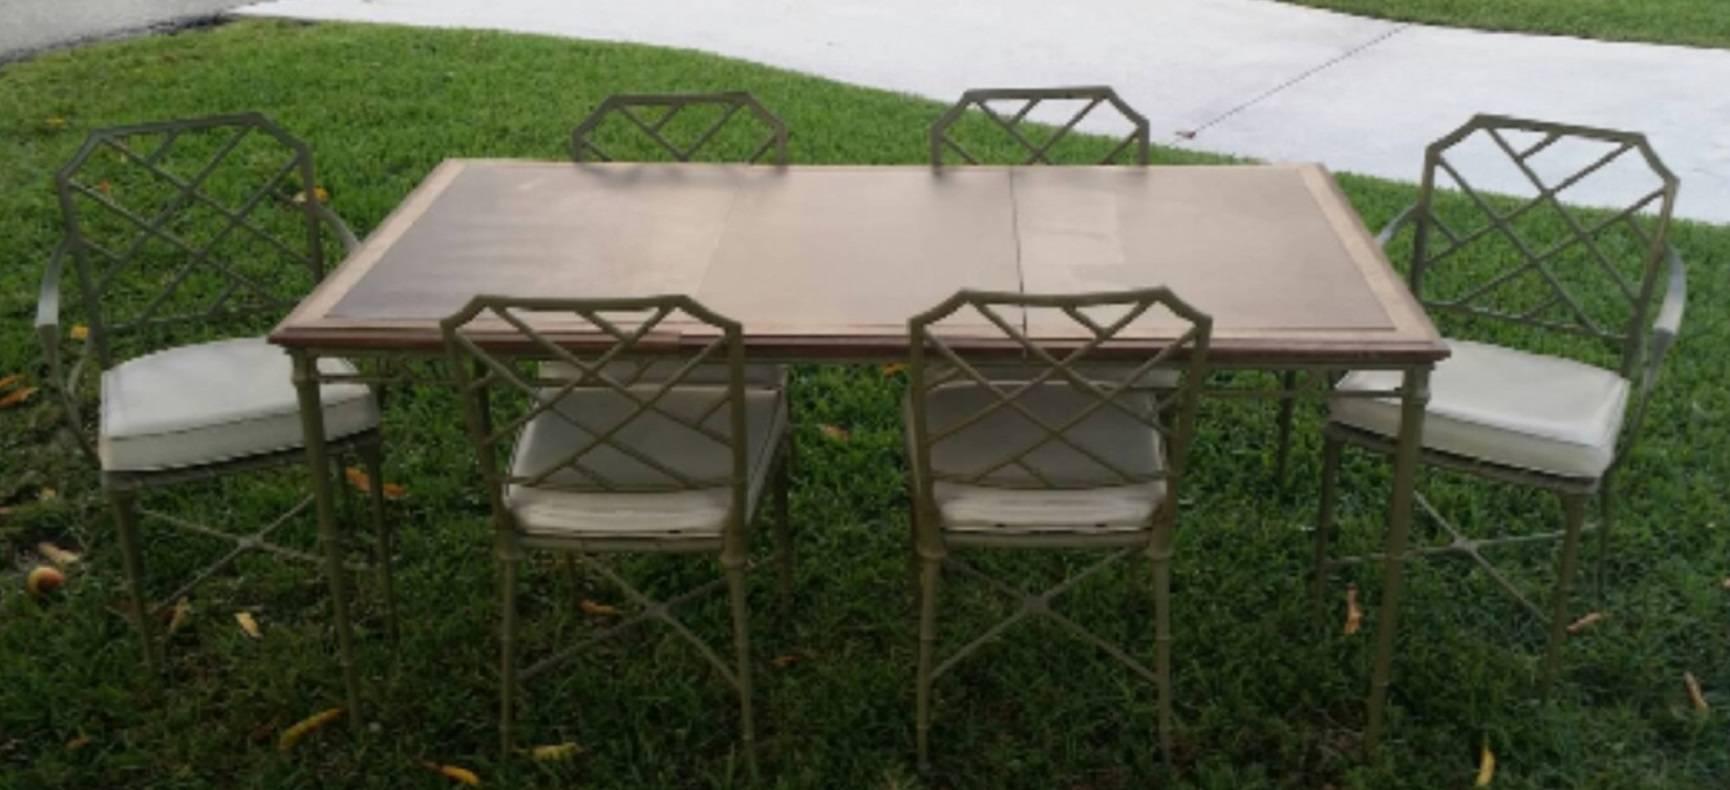 Vintage Hollywood Palm Beach Regency seven-piece Brown Jordan Calcutta faux bamboo patio metal dining table set aluminium. Set includes four side chairs, two armchairs, dining table with extension leaf. Wood top is original and may need refinishing.